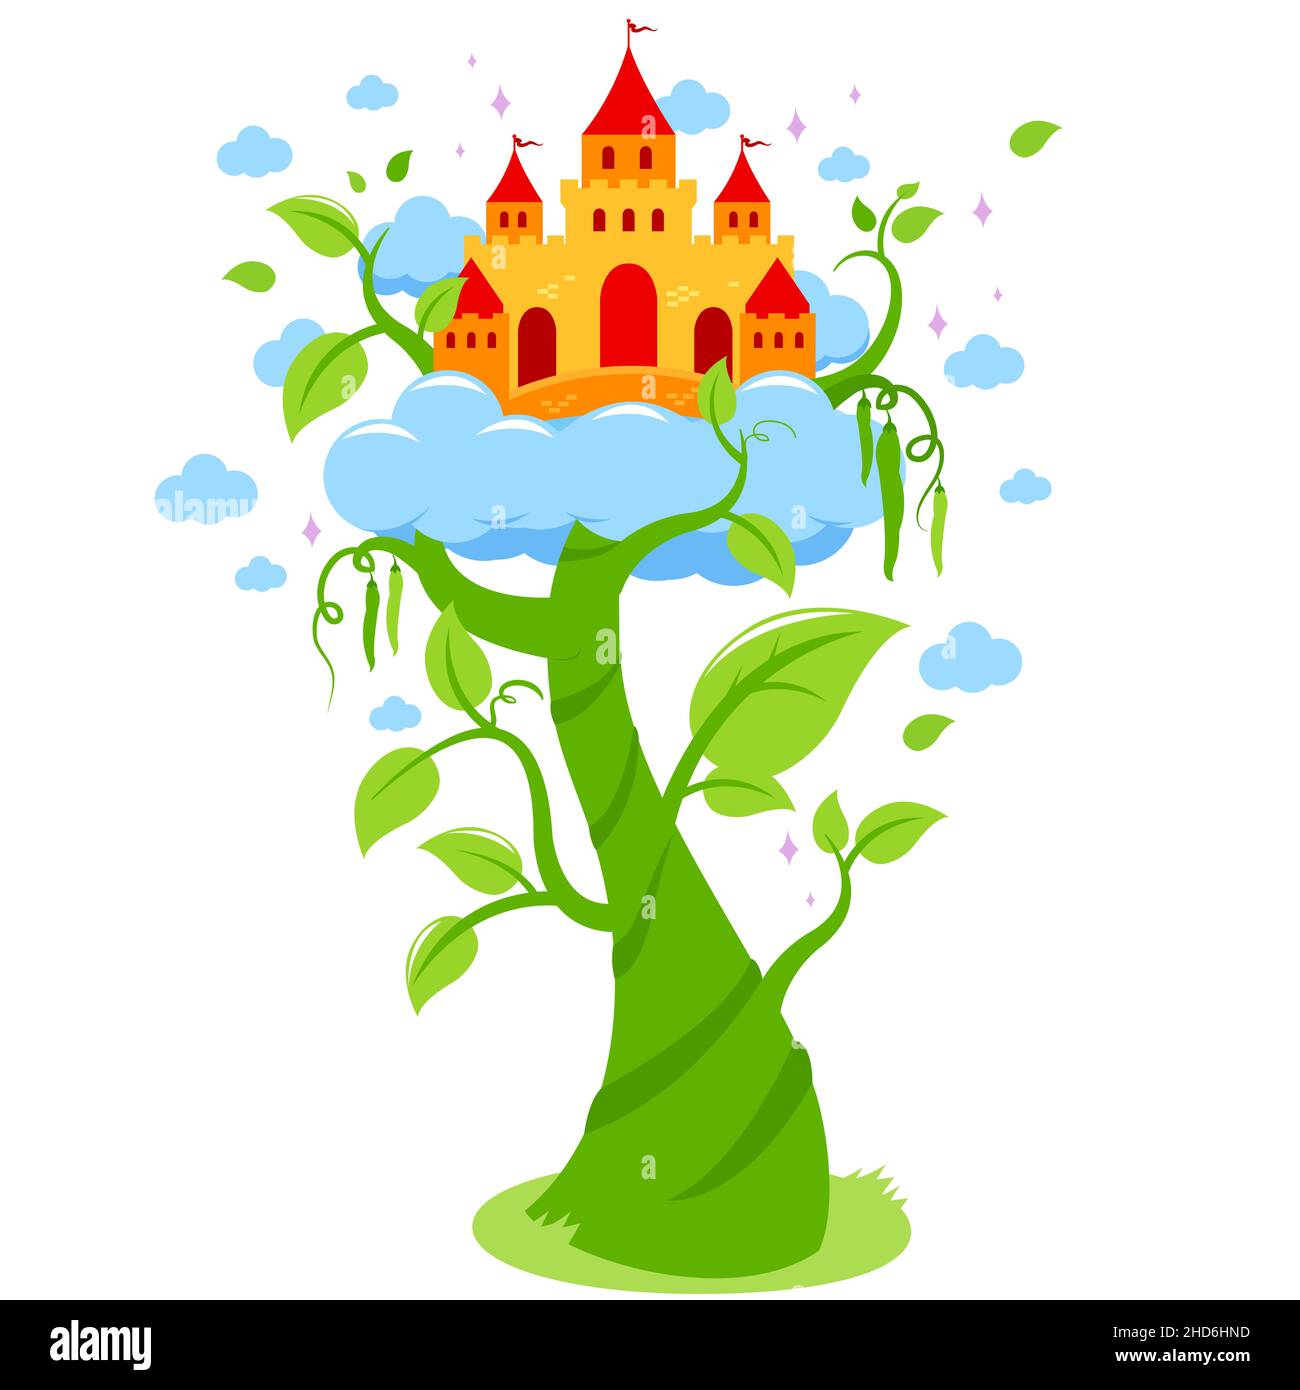 Magic beanstalk and castle in the clouds. Stock Photo